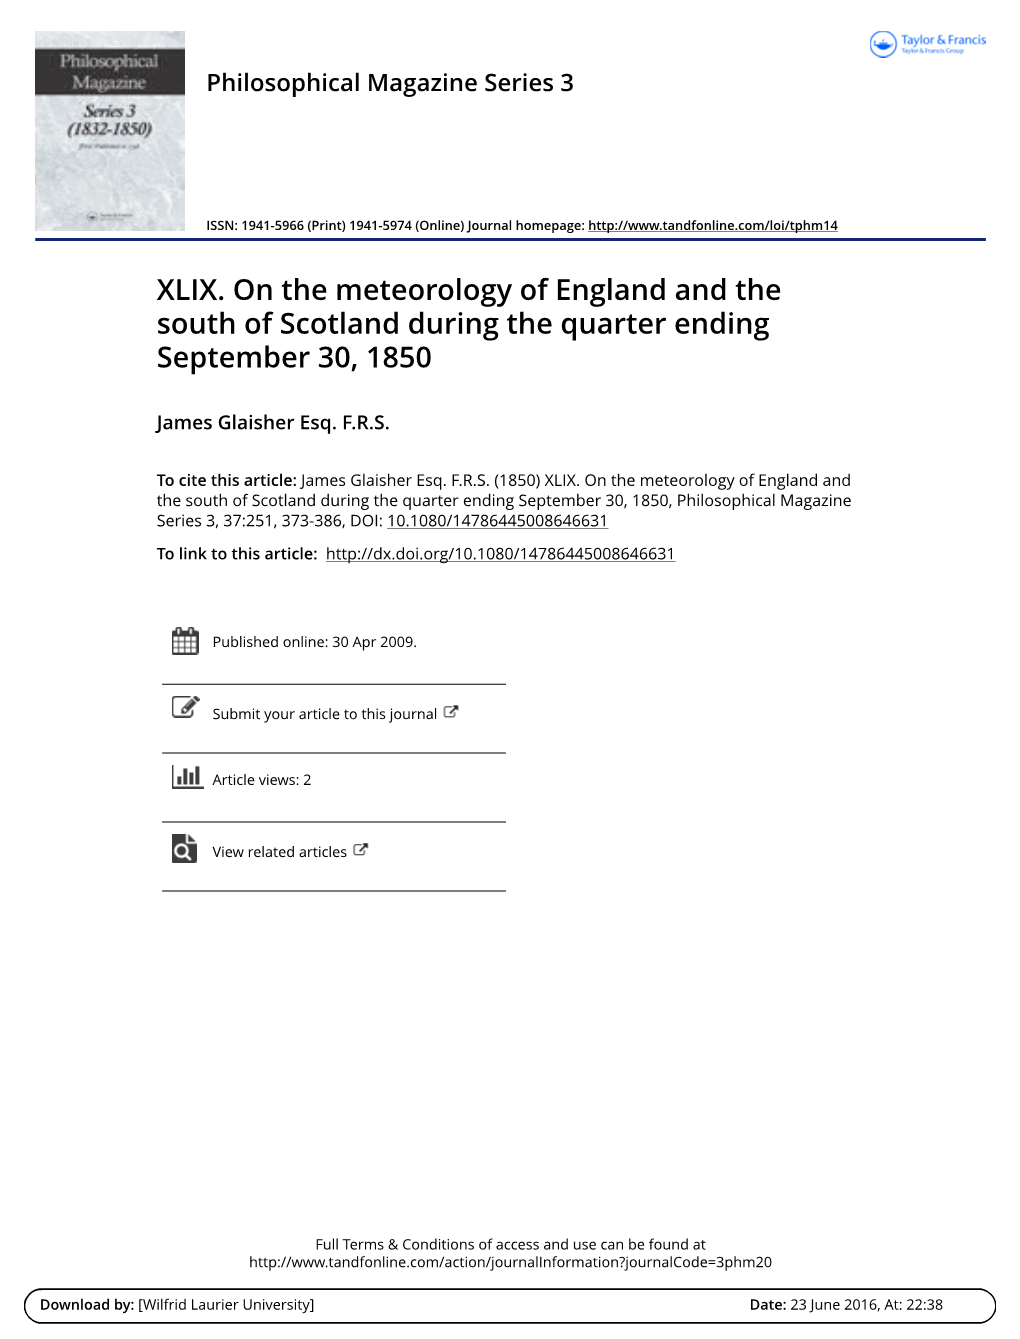 XLIX. on the Meteorology of England and the South of Scotland During the Quarter Ending September 30, 1850